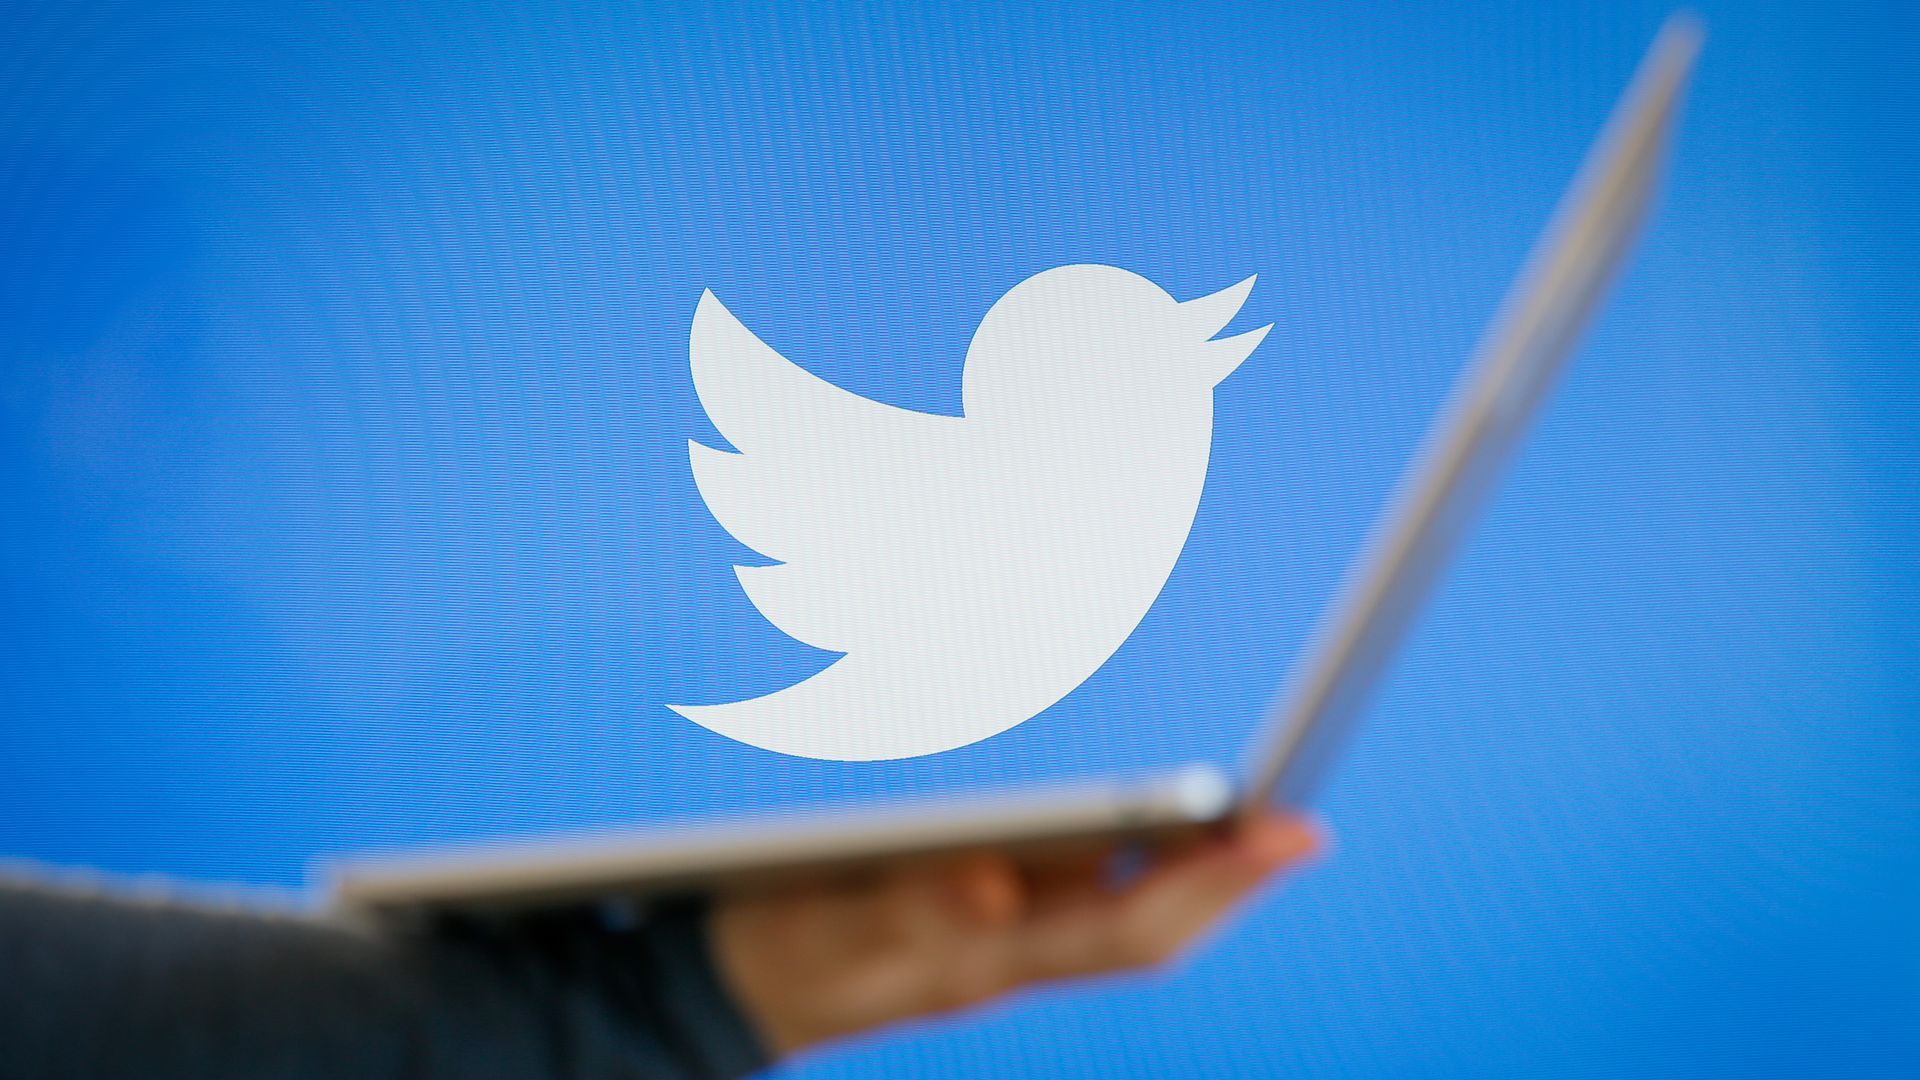 A Twitter logo bird in white on blue background, with an open laptop in front.